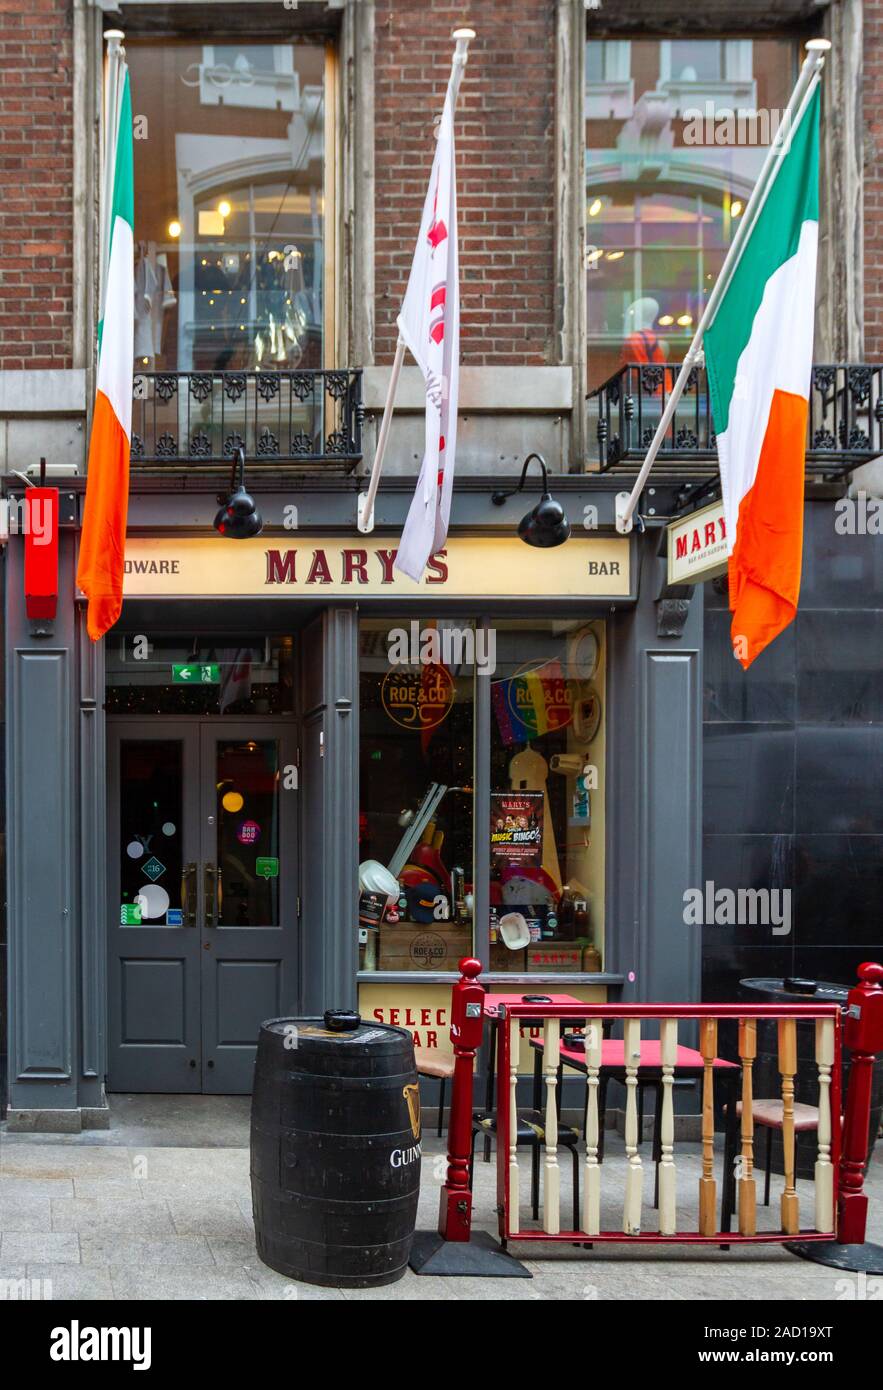 Mary's bar and hardware store, pub, public house and shop in Dublin city, Ireland. Small pub with Irish tricolour tricolor national flags. Marys Stock Photo